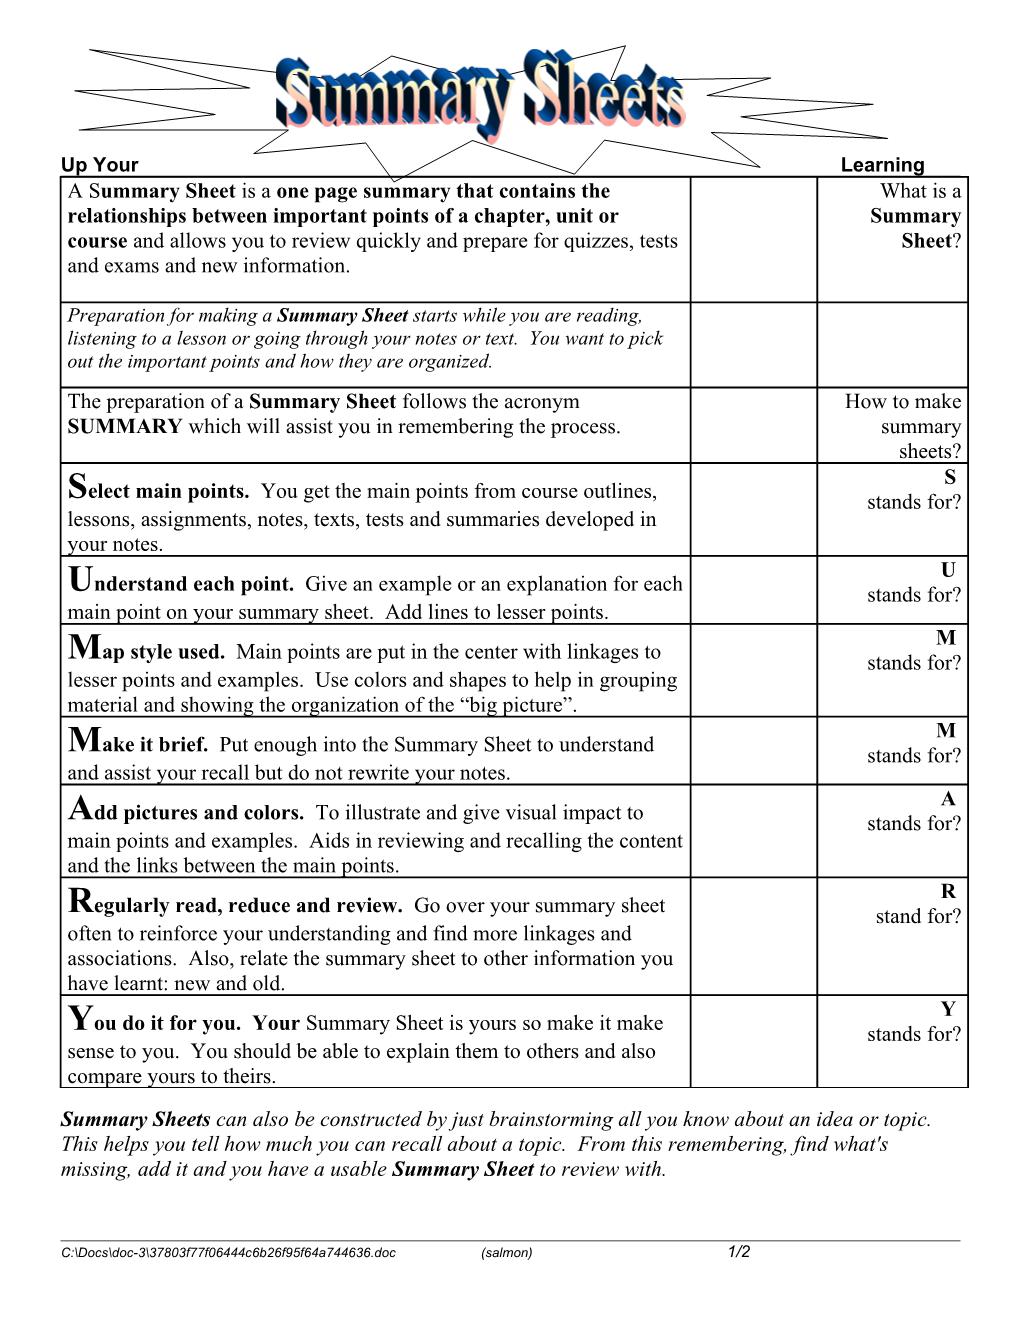 A Summary Sheet Is a One Page Summary of a Chapter, Unit, Or Even a Course That Allows